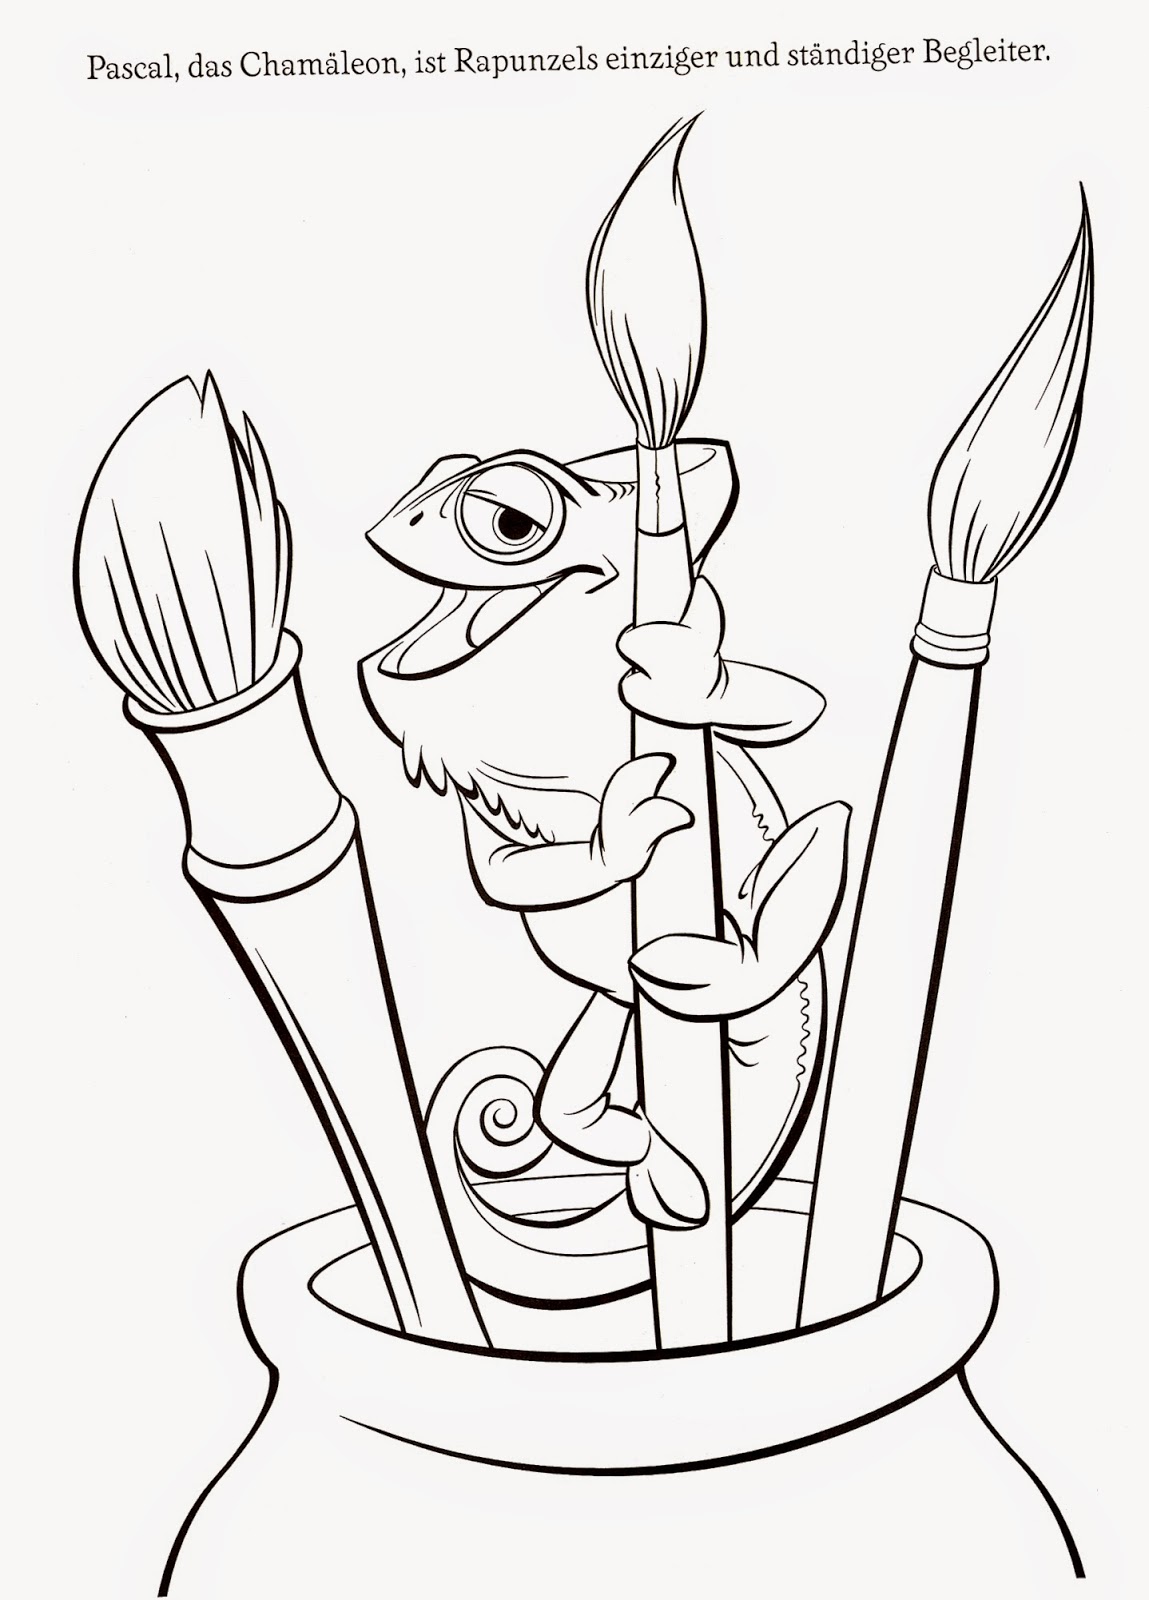 Coloring Pages: "Tangled" Free Printable Coloring Pages of ...